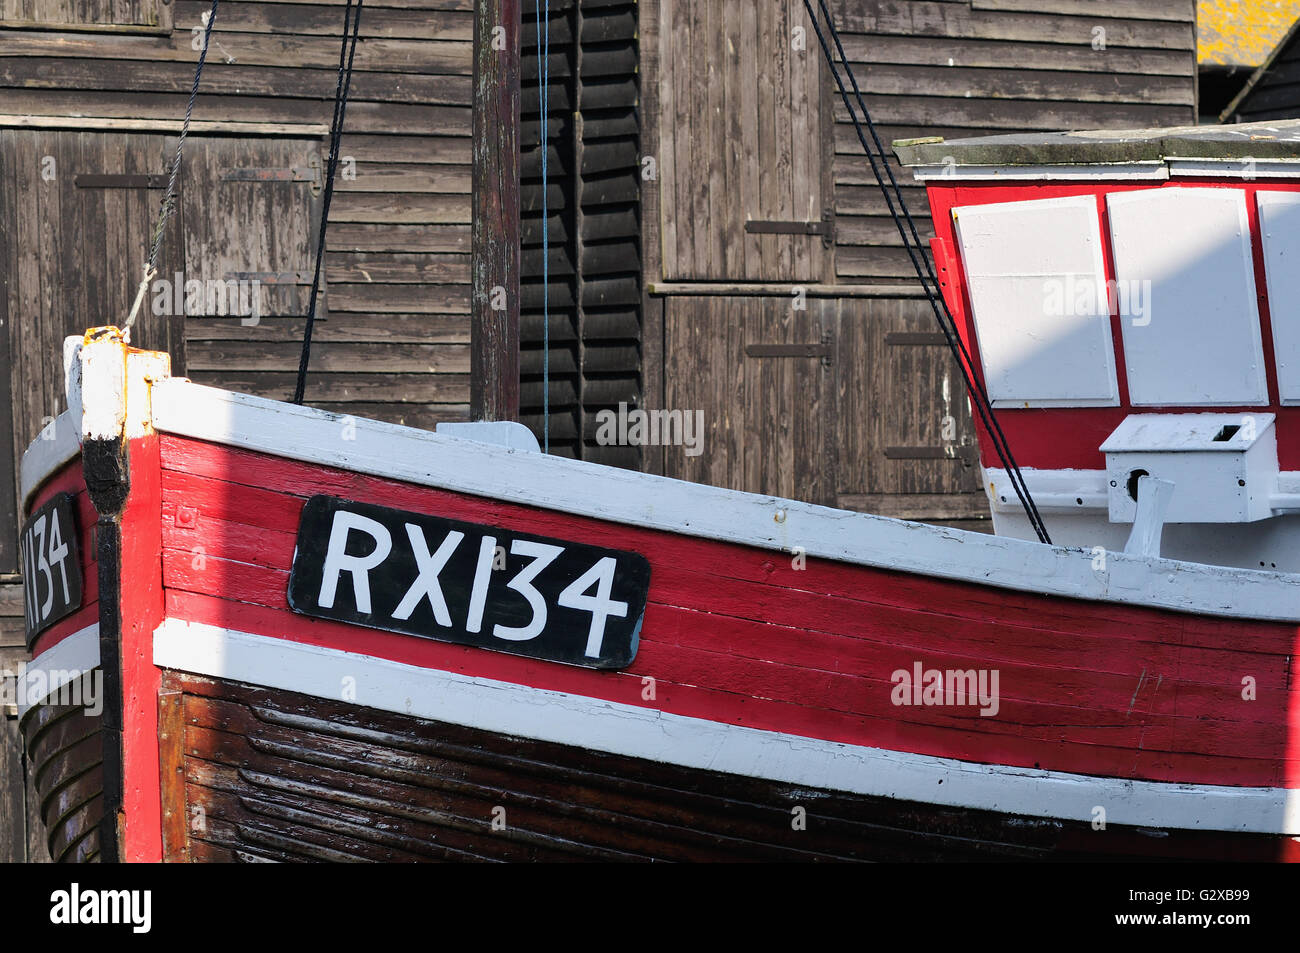 Fishing boat and net sheds at Hastings, East Sussex, UK Stock Photo